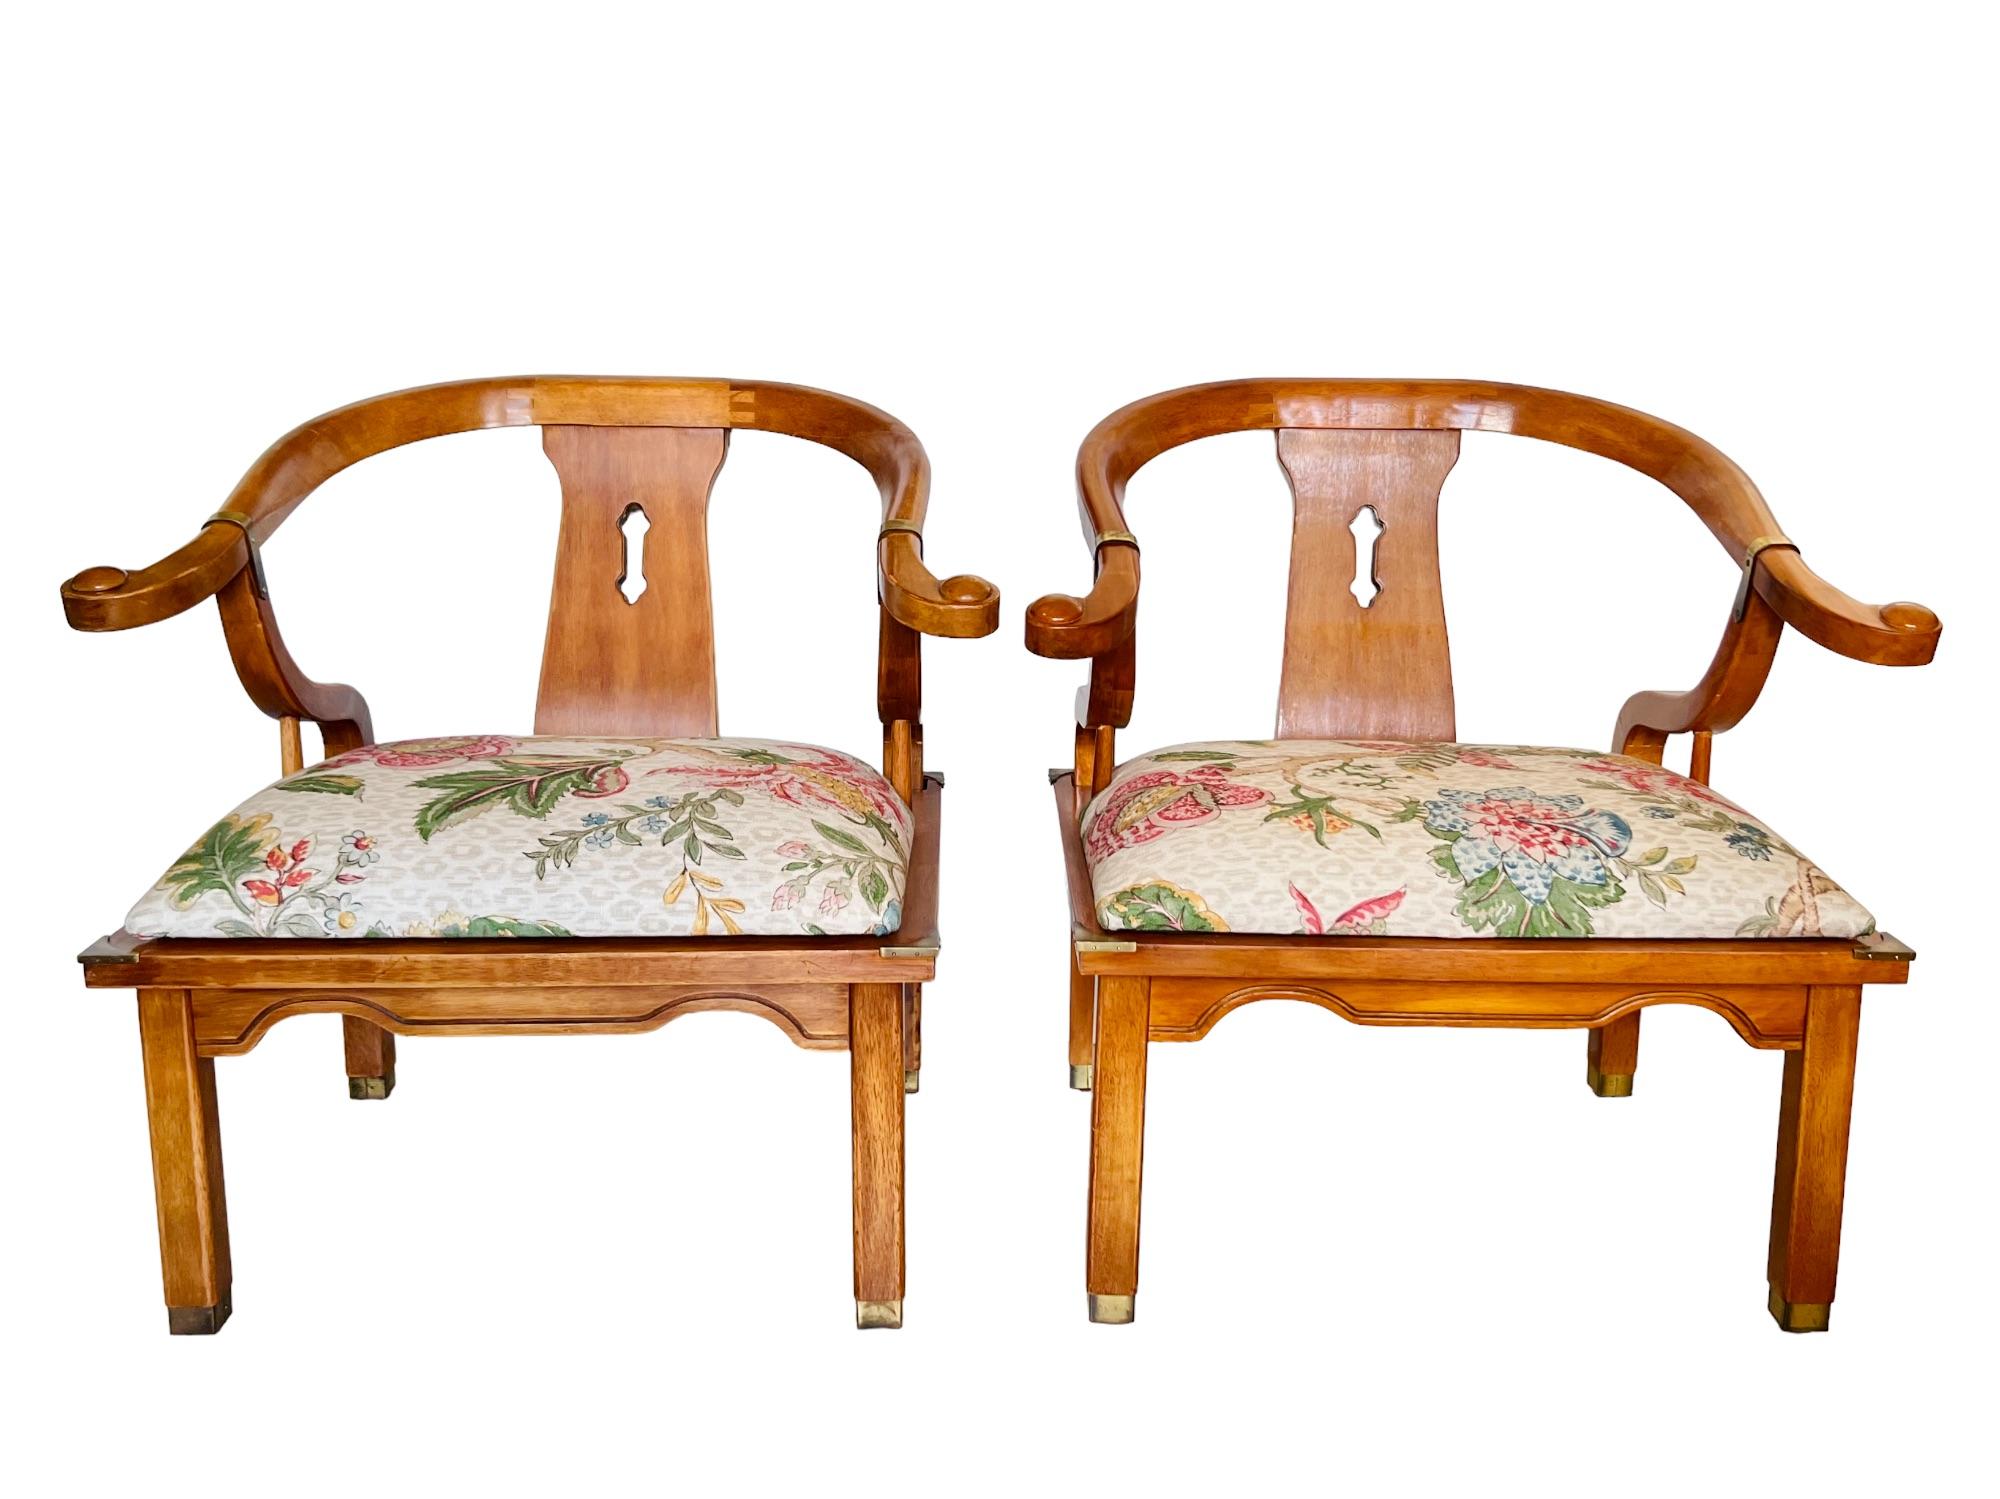 A late 20th century pair of chinoiserie Ming style yoke back horseshoe chairs by Schnadig. Wood frames with brass details on armrests, seat corners and feet. Woven cotton/linen blend fabric featuring tone on tone bisque leopard pattern with vibrant